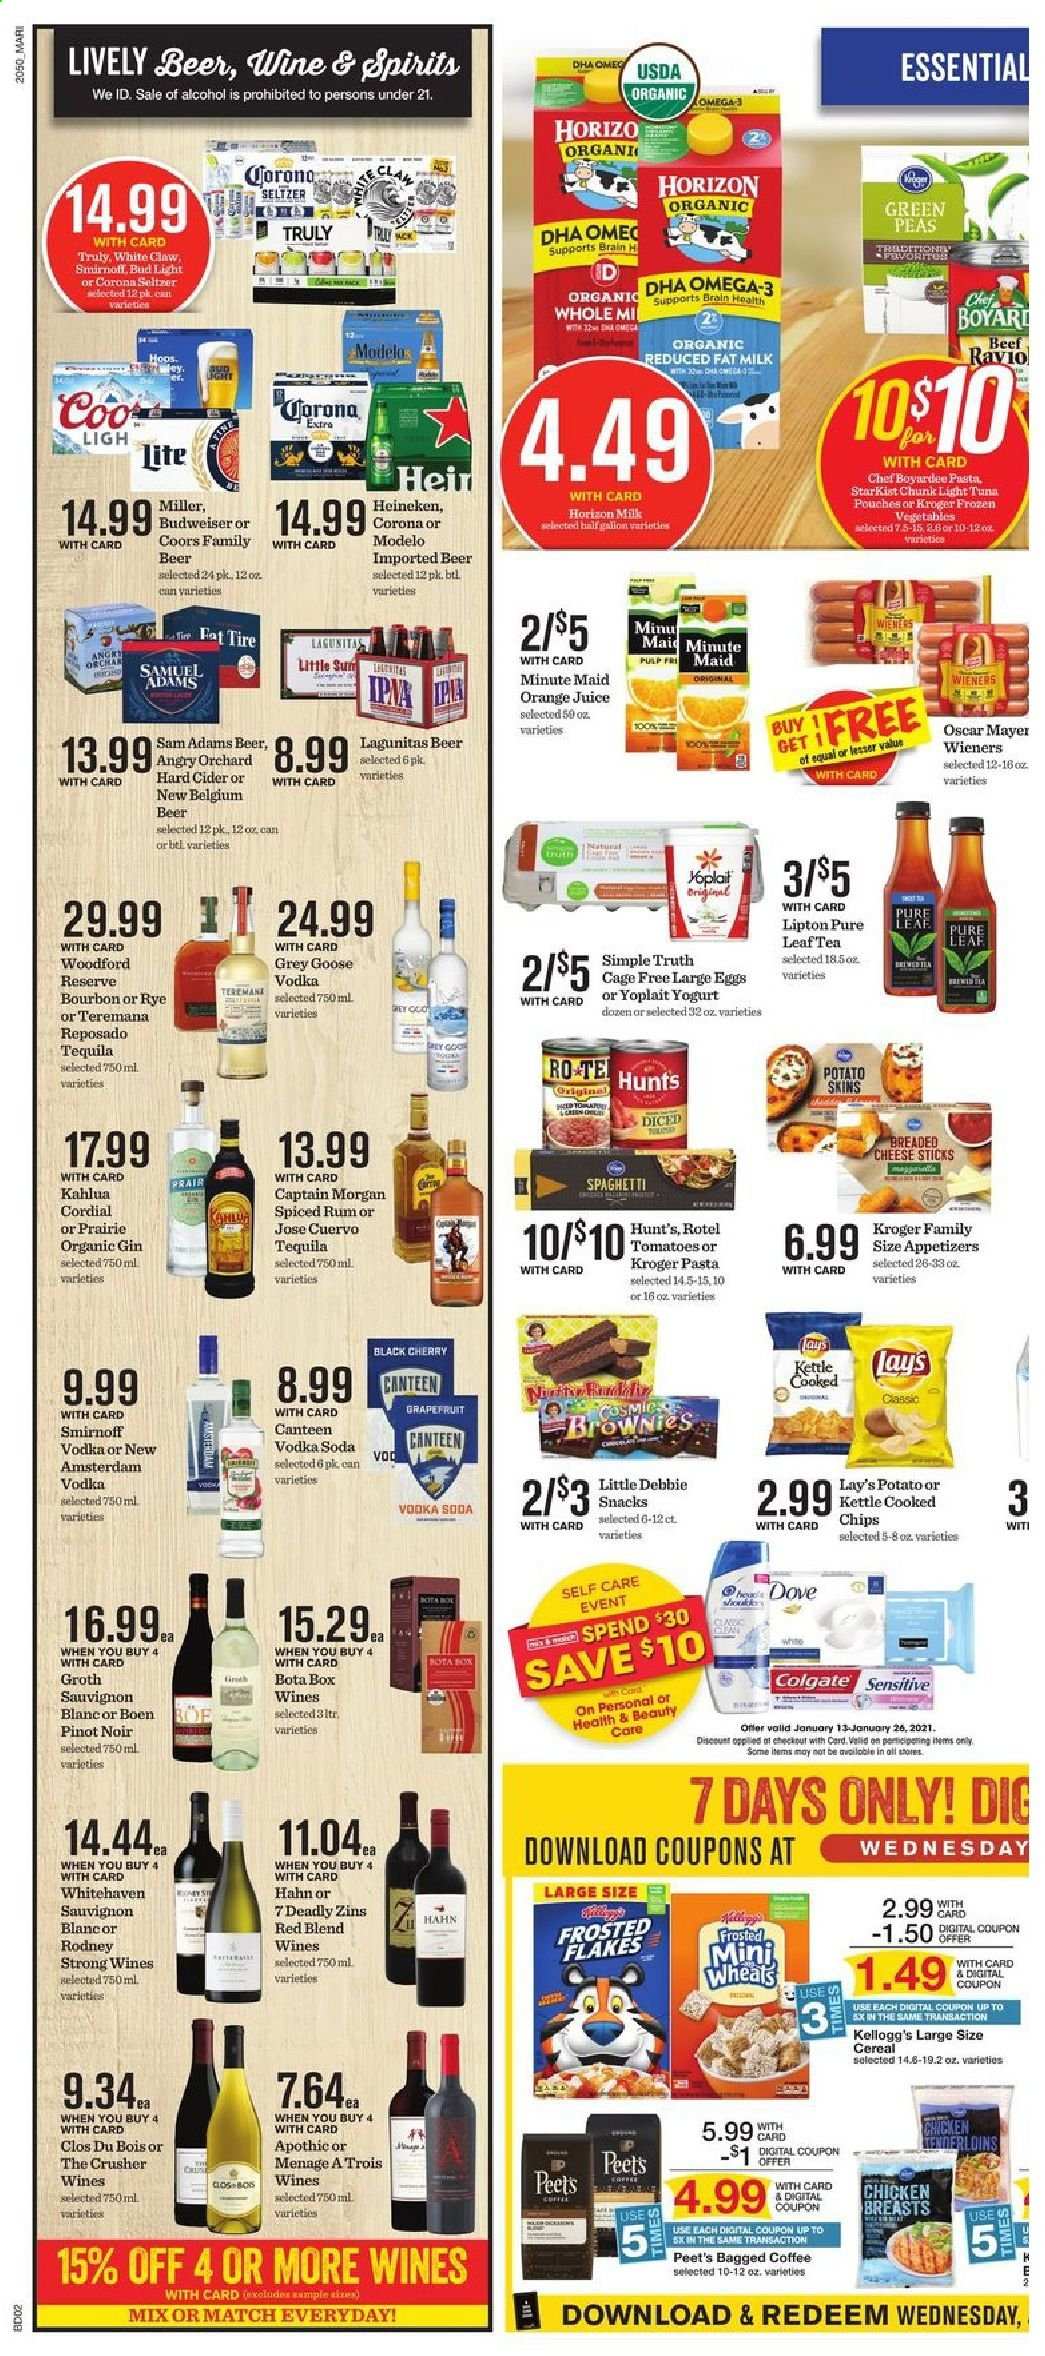 thumbnail - Mariano’s Flyer - 01/13/2021 - 01/19/2021 - Sales products - Budweiser, Coors, brownies, 7 Days, tuna, StarKist, Oscar Mayer, cheese, yoghurt, Yoplait, milk, cage free eggs, large eggs, frozen vegetables, peas, Kellogg's, snack, Lay’s, cheese sticks, light tuna, cereals, Frosted Flakes, spaghetti, pasta, orange juice, soda, juice, Lipton, seltzer water, tea, Pure Leaf, bagged coffee, wine, Pinot Noir, alcohol, apple cider, bourbon, Captain Morgan, gin, rum, Smirnoff, spiced rum, tequila, vodka, Kahlúa, White Claw, TRULY, bourbon whiskey, beer, Bud Light, Corona Extra, Heineken, Miller, Hahn, Modelo, chicken breasts, Omega-3. Page 4.